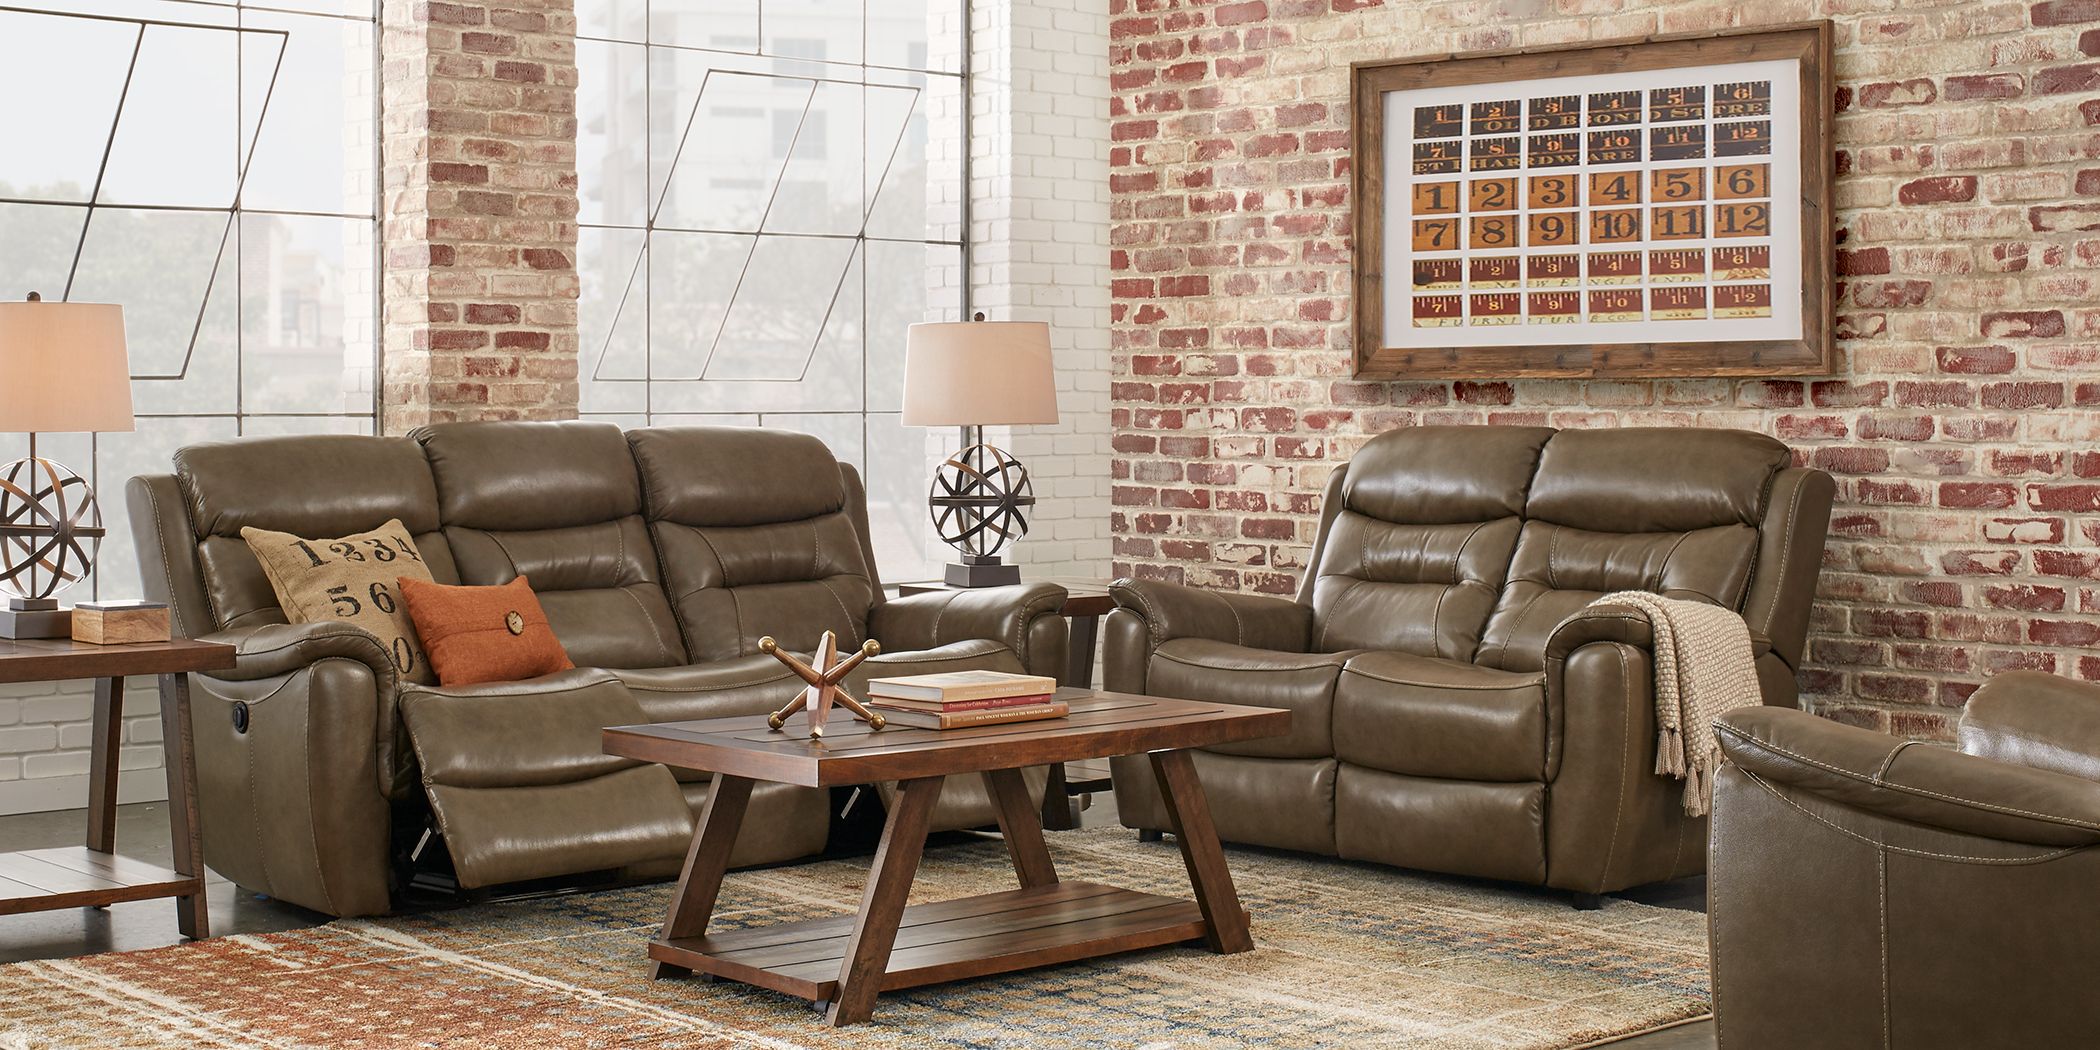 Sabella Taupe Leather 5 Pc Living Room with Reclining Sofa